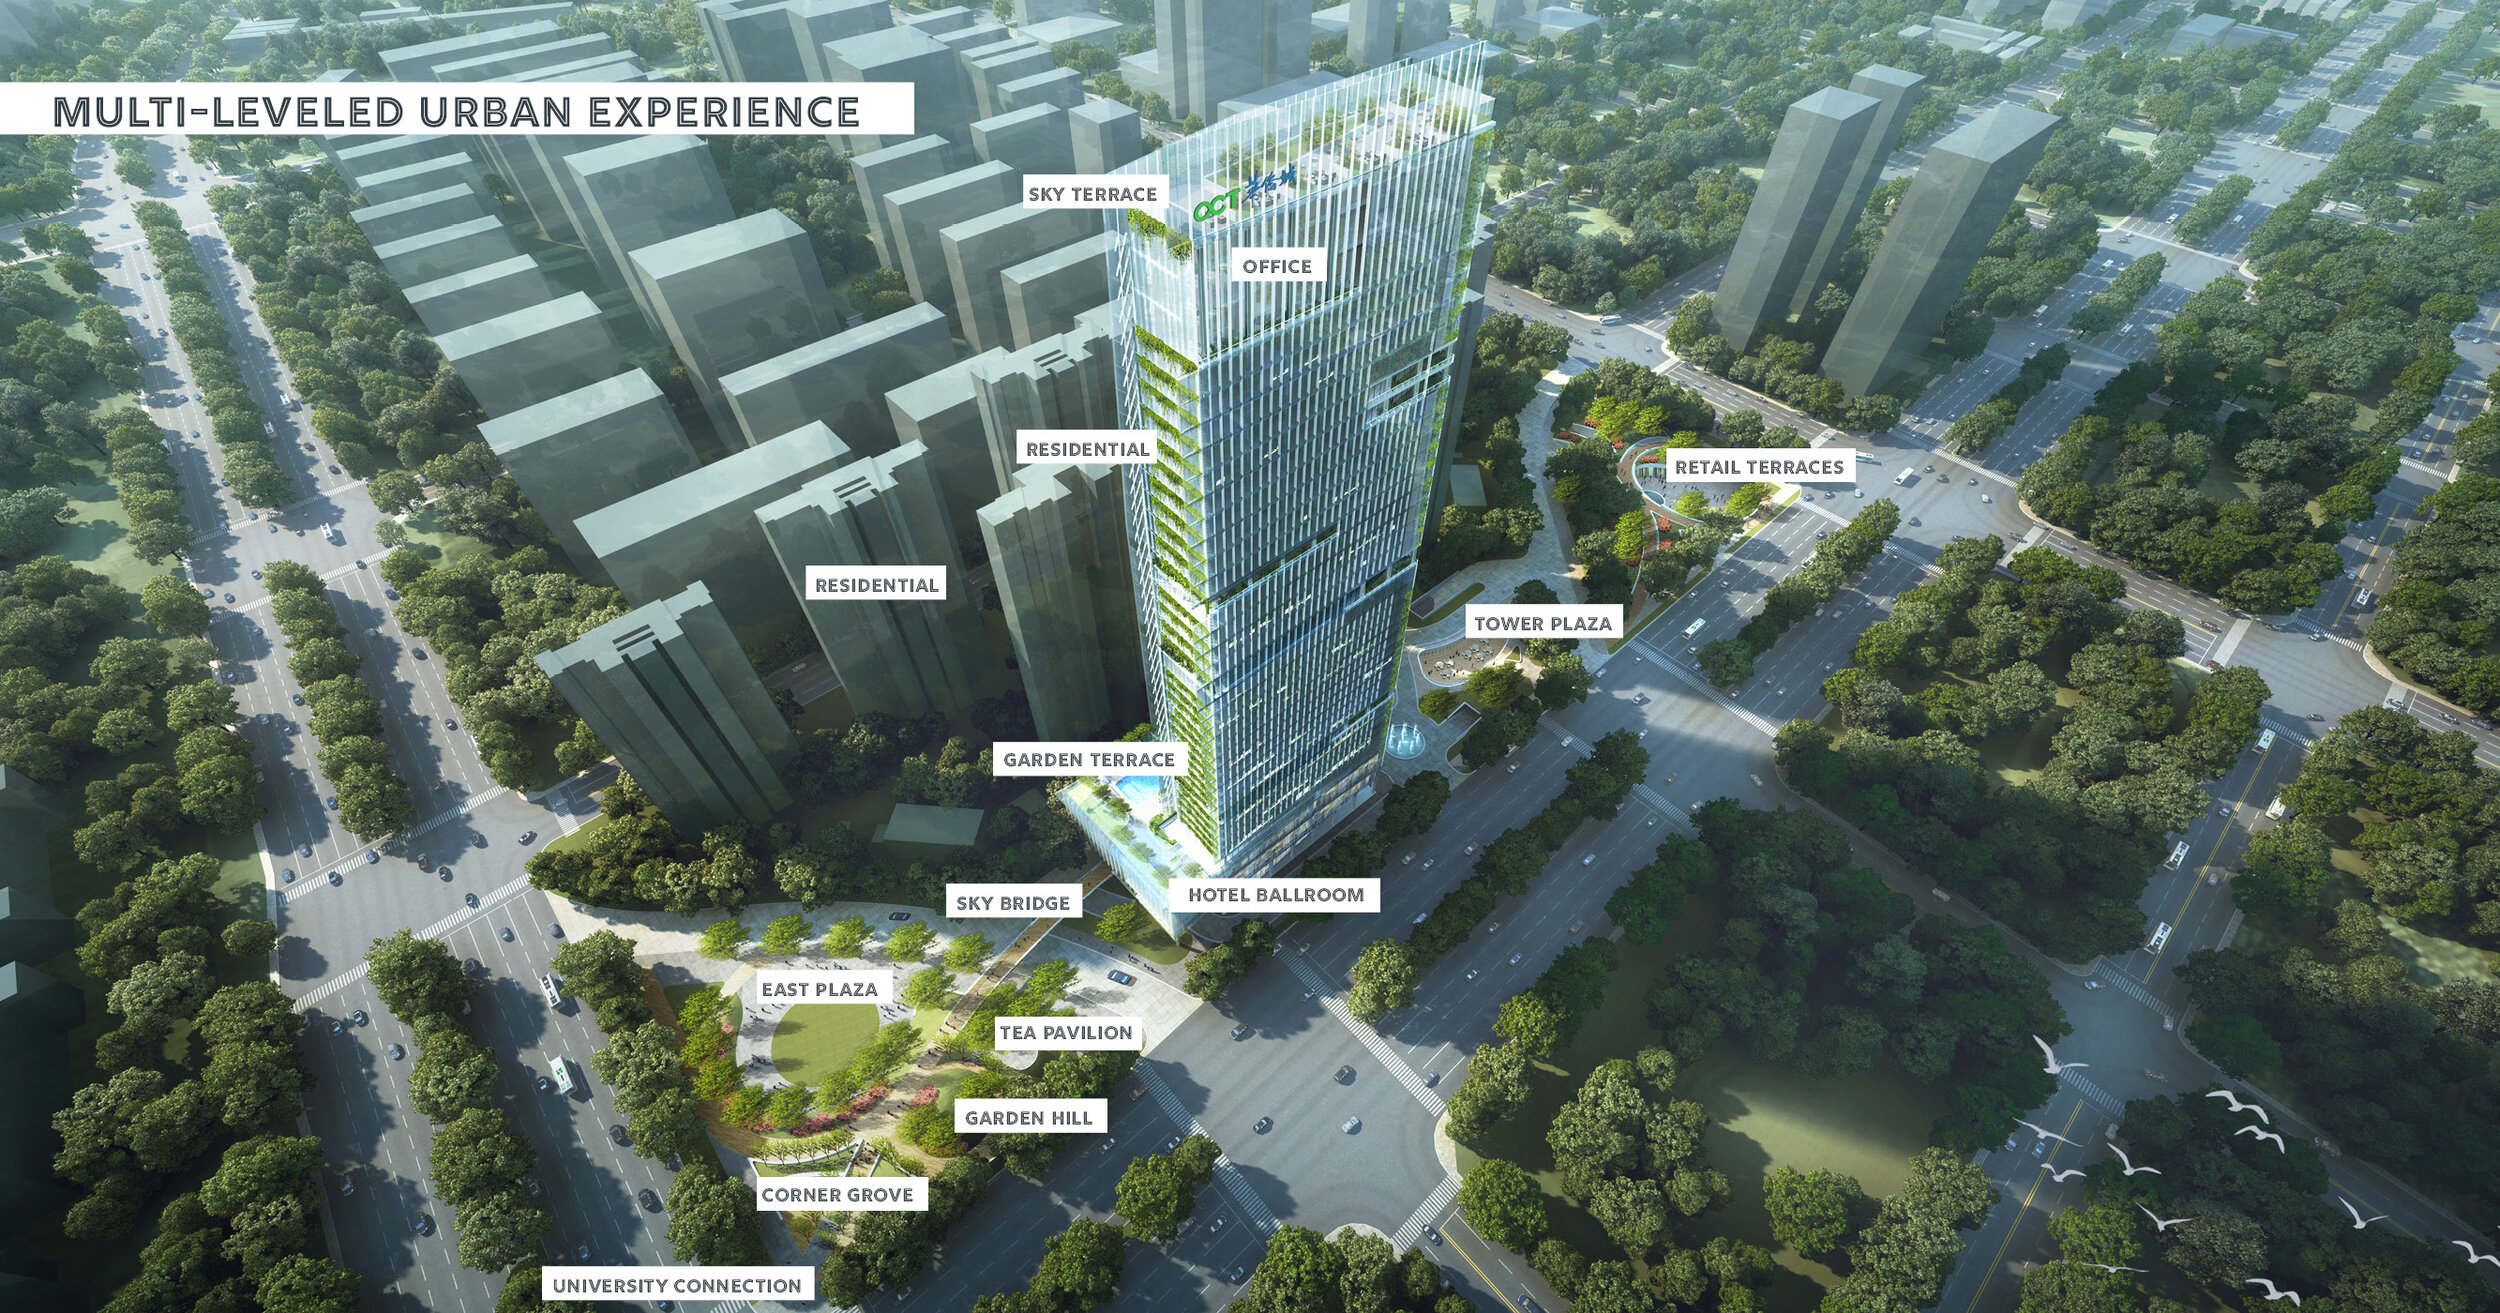  Kunming Tower Park is landscape design that recommended utilizing adjacent designated open space in coordination with a layered multi-level urban landscape and public plaza design that weaves through the heart of two proposed mixed-use towers in Kun